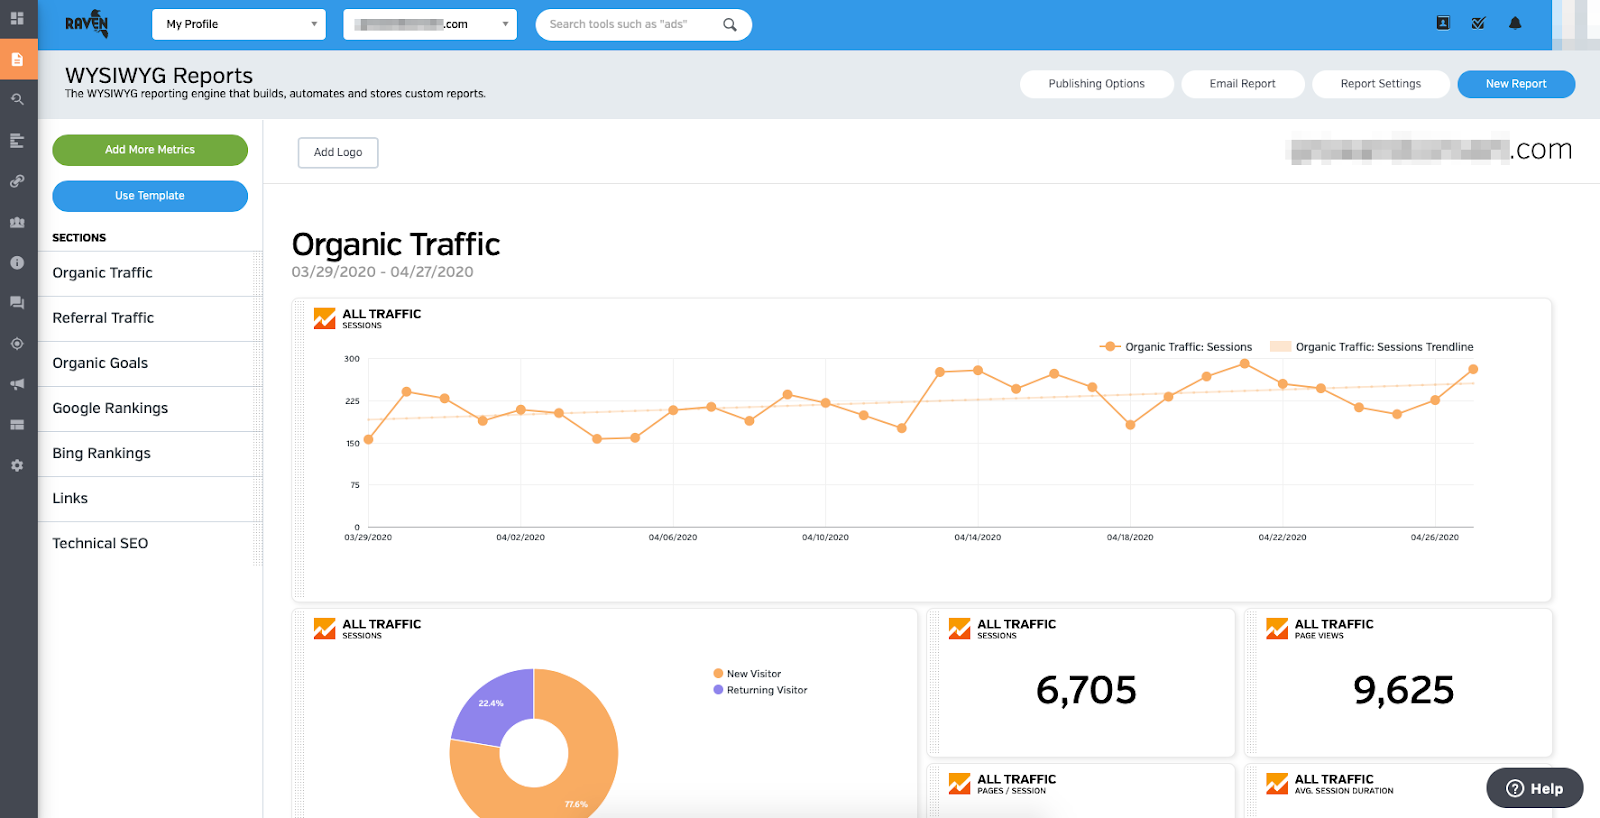 Raven provides WYSIWYG Reports with all organic traffic rankings.